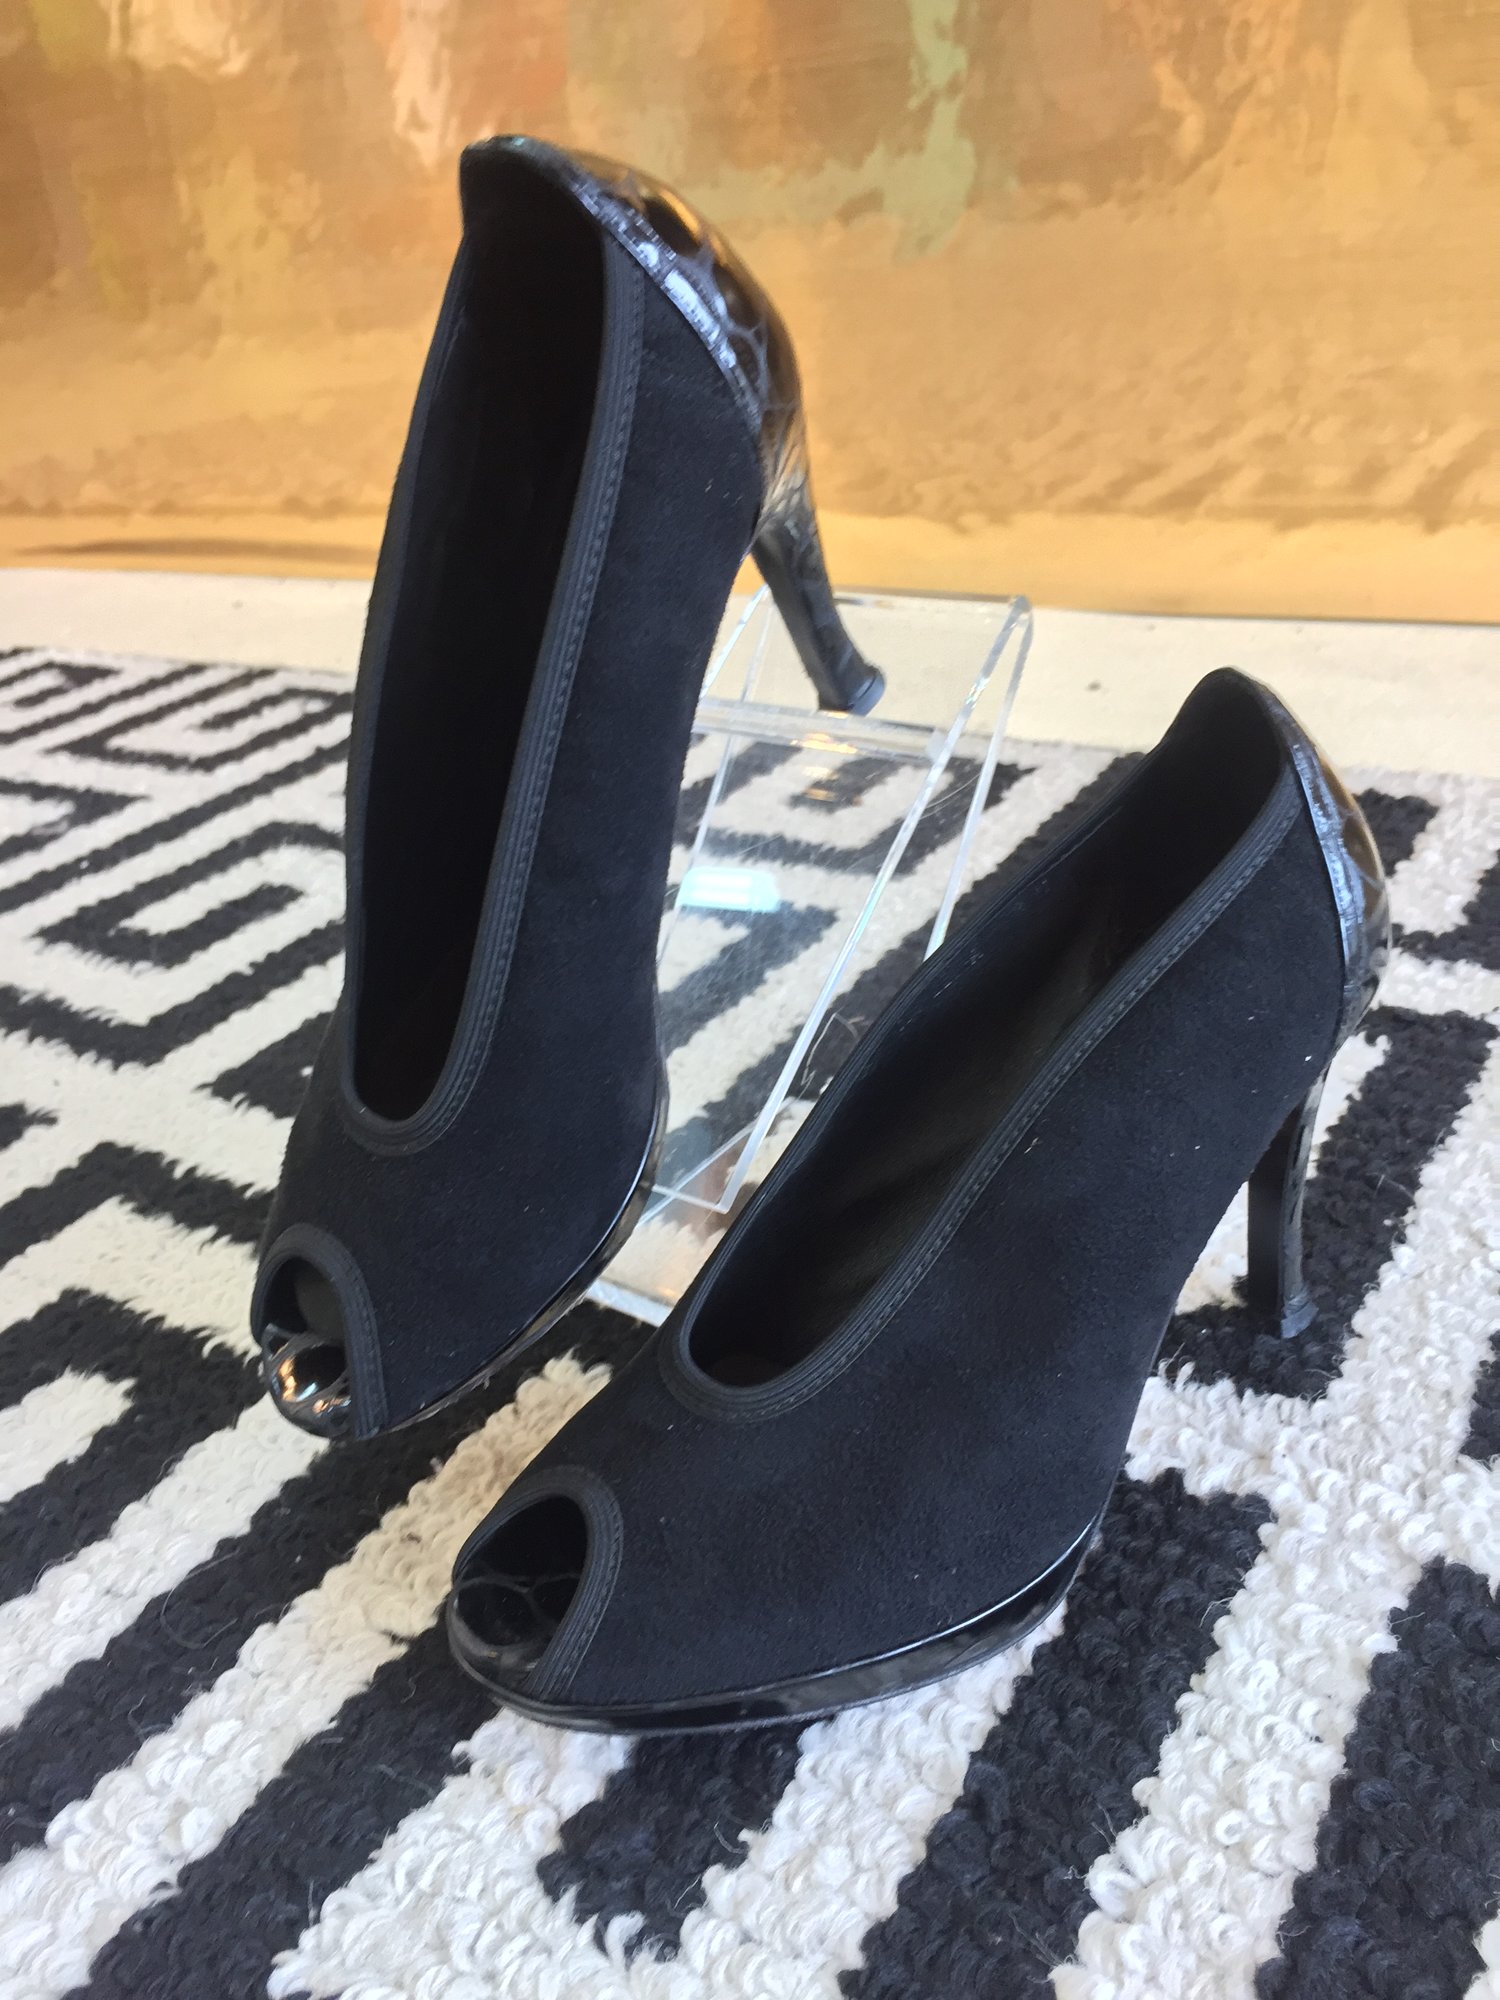 Donald J. Pliner heels, size 8. Black suede with leather detail. Has footpetal inserts. Approx 3.5 inch heel, with duster bag. Retail approx: $109